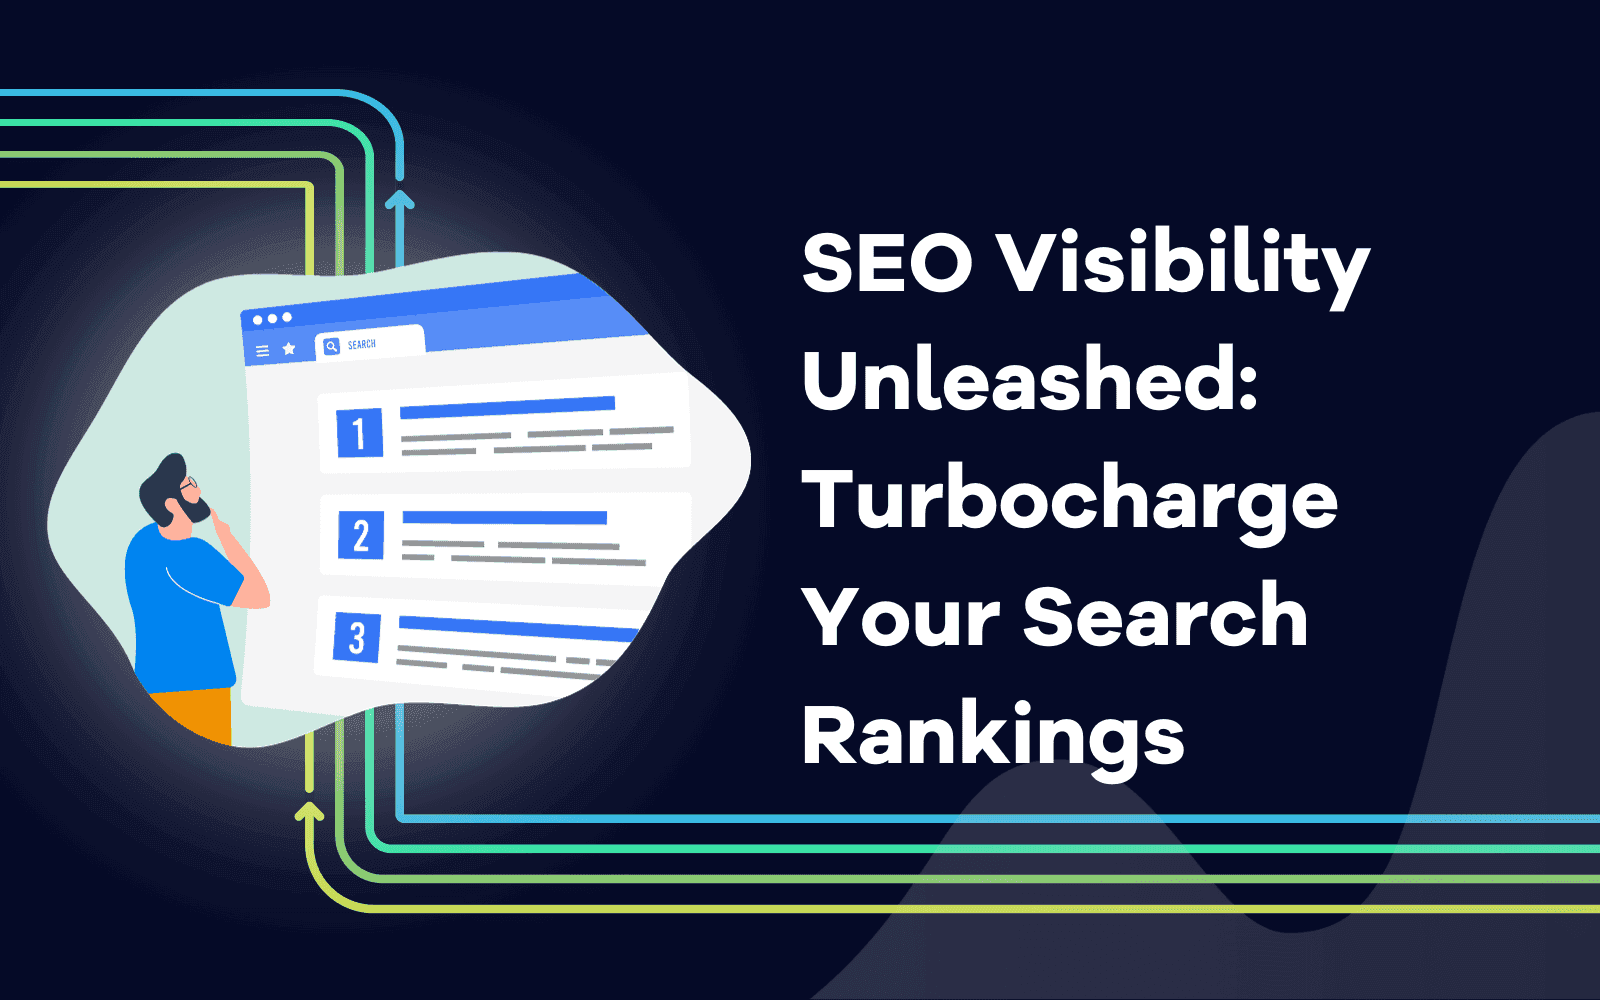 SEO Visibility Unleashed Turbocharge Your Search Rankings.png